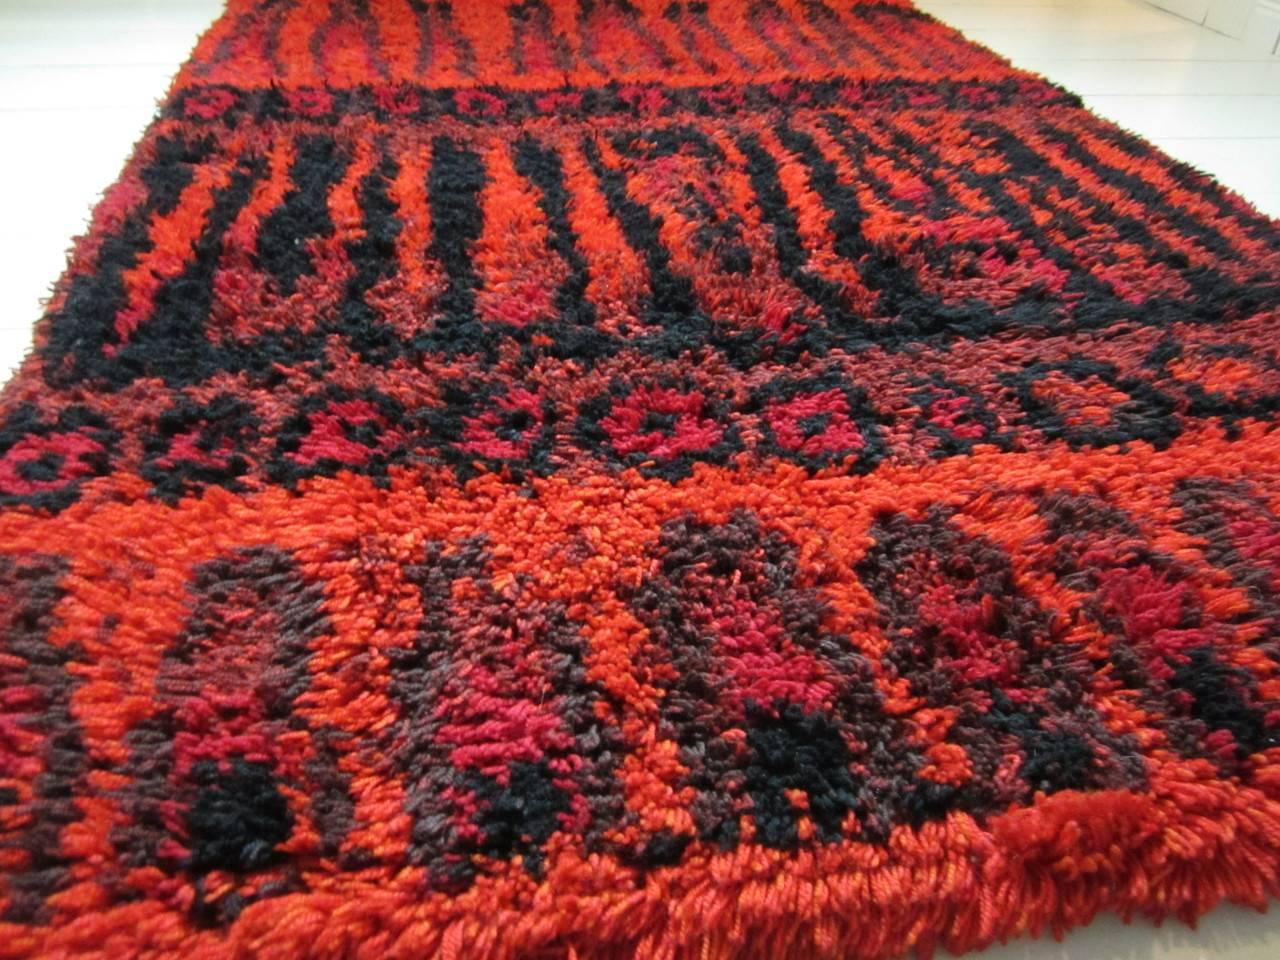 Textile designer Ulla Härkönen designed this pop art -style red and black Rya rug named Flaming (Liekehtivä)  in 1960s. Handmade in Finland in 1960-70s. A special and rare model with long pile.

A Scandinavian Rya is a natural way to increase